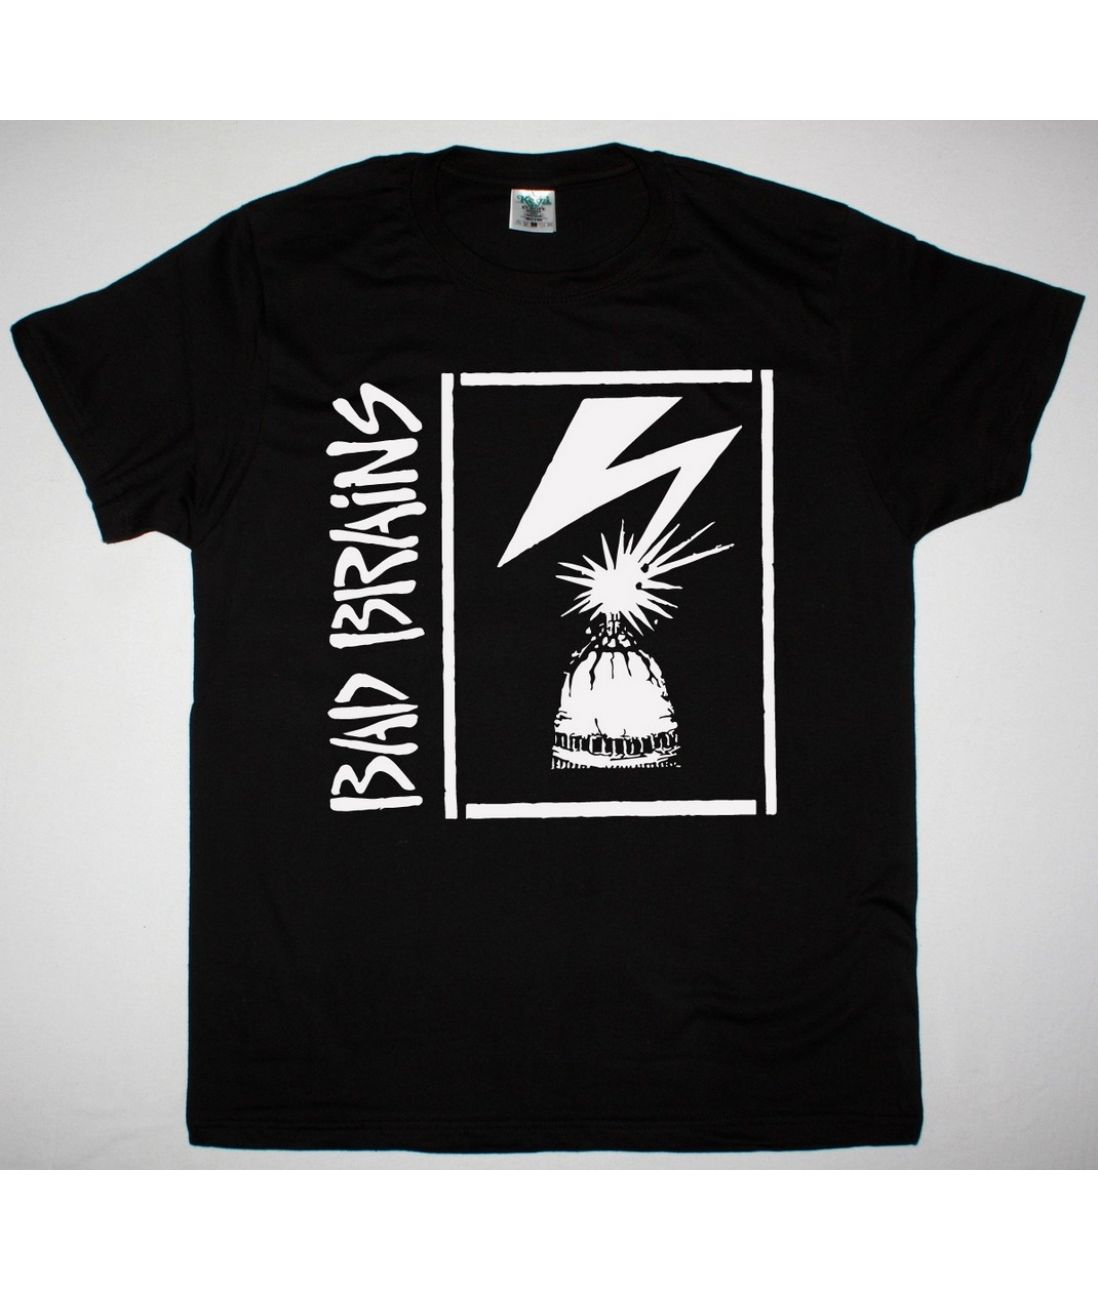 BAD BRAINS - Capitol LOGO T-SHIRT black *** ALL SIZES AVAILABLE ***